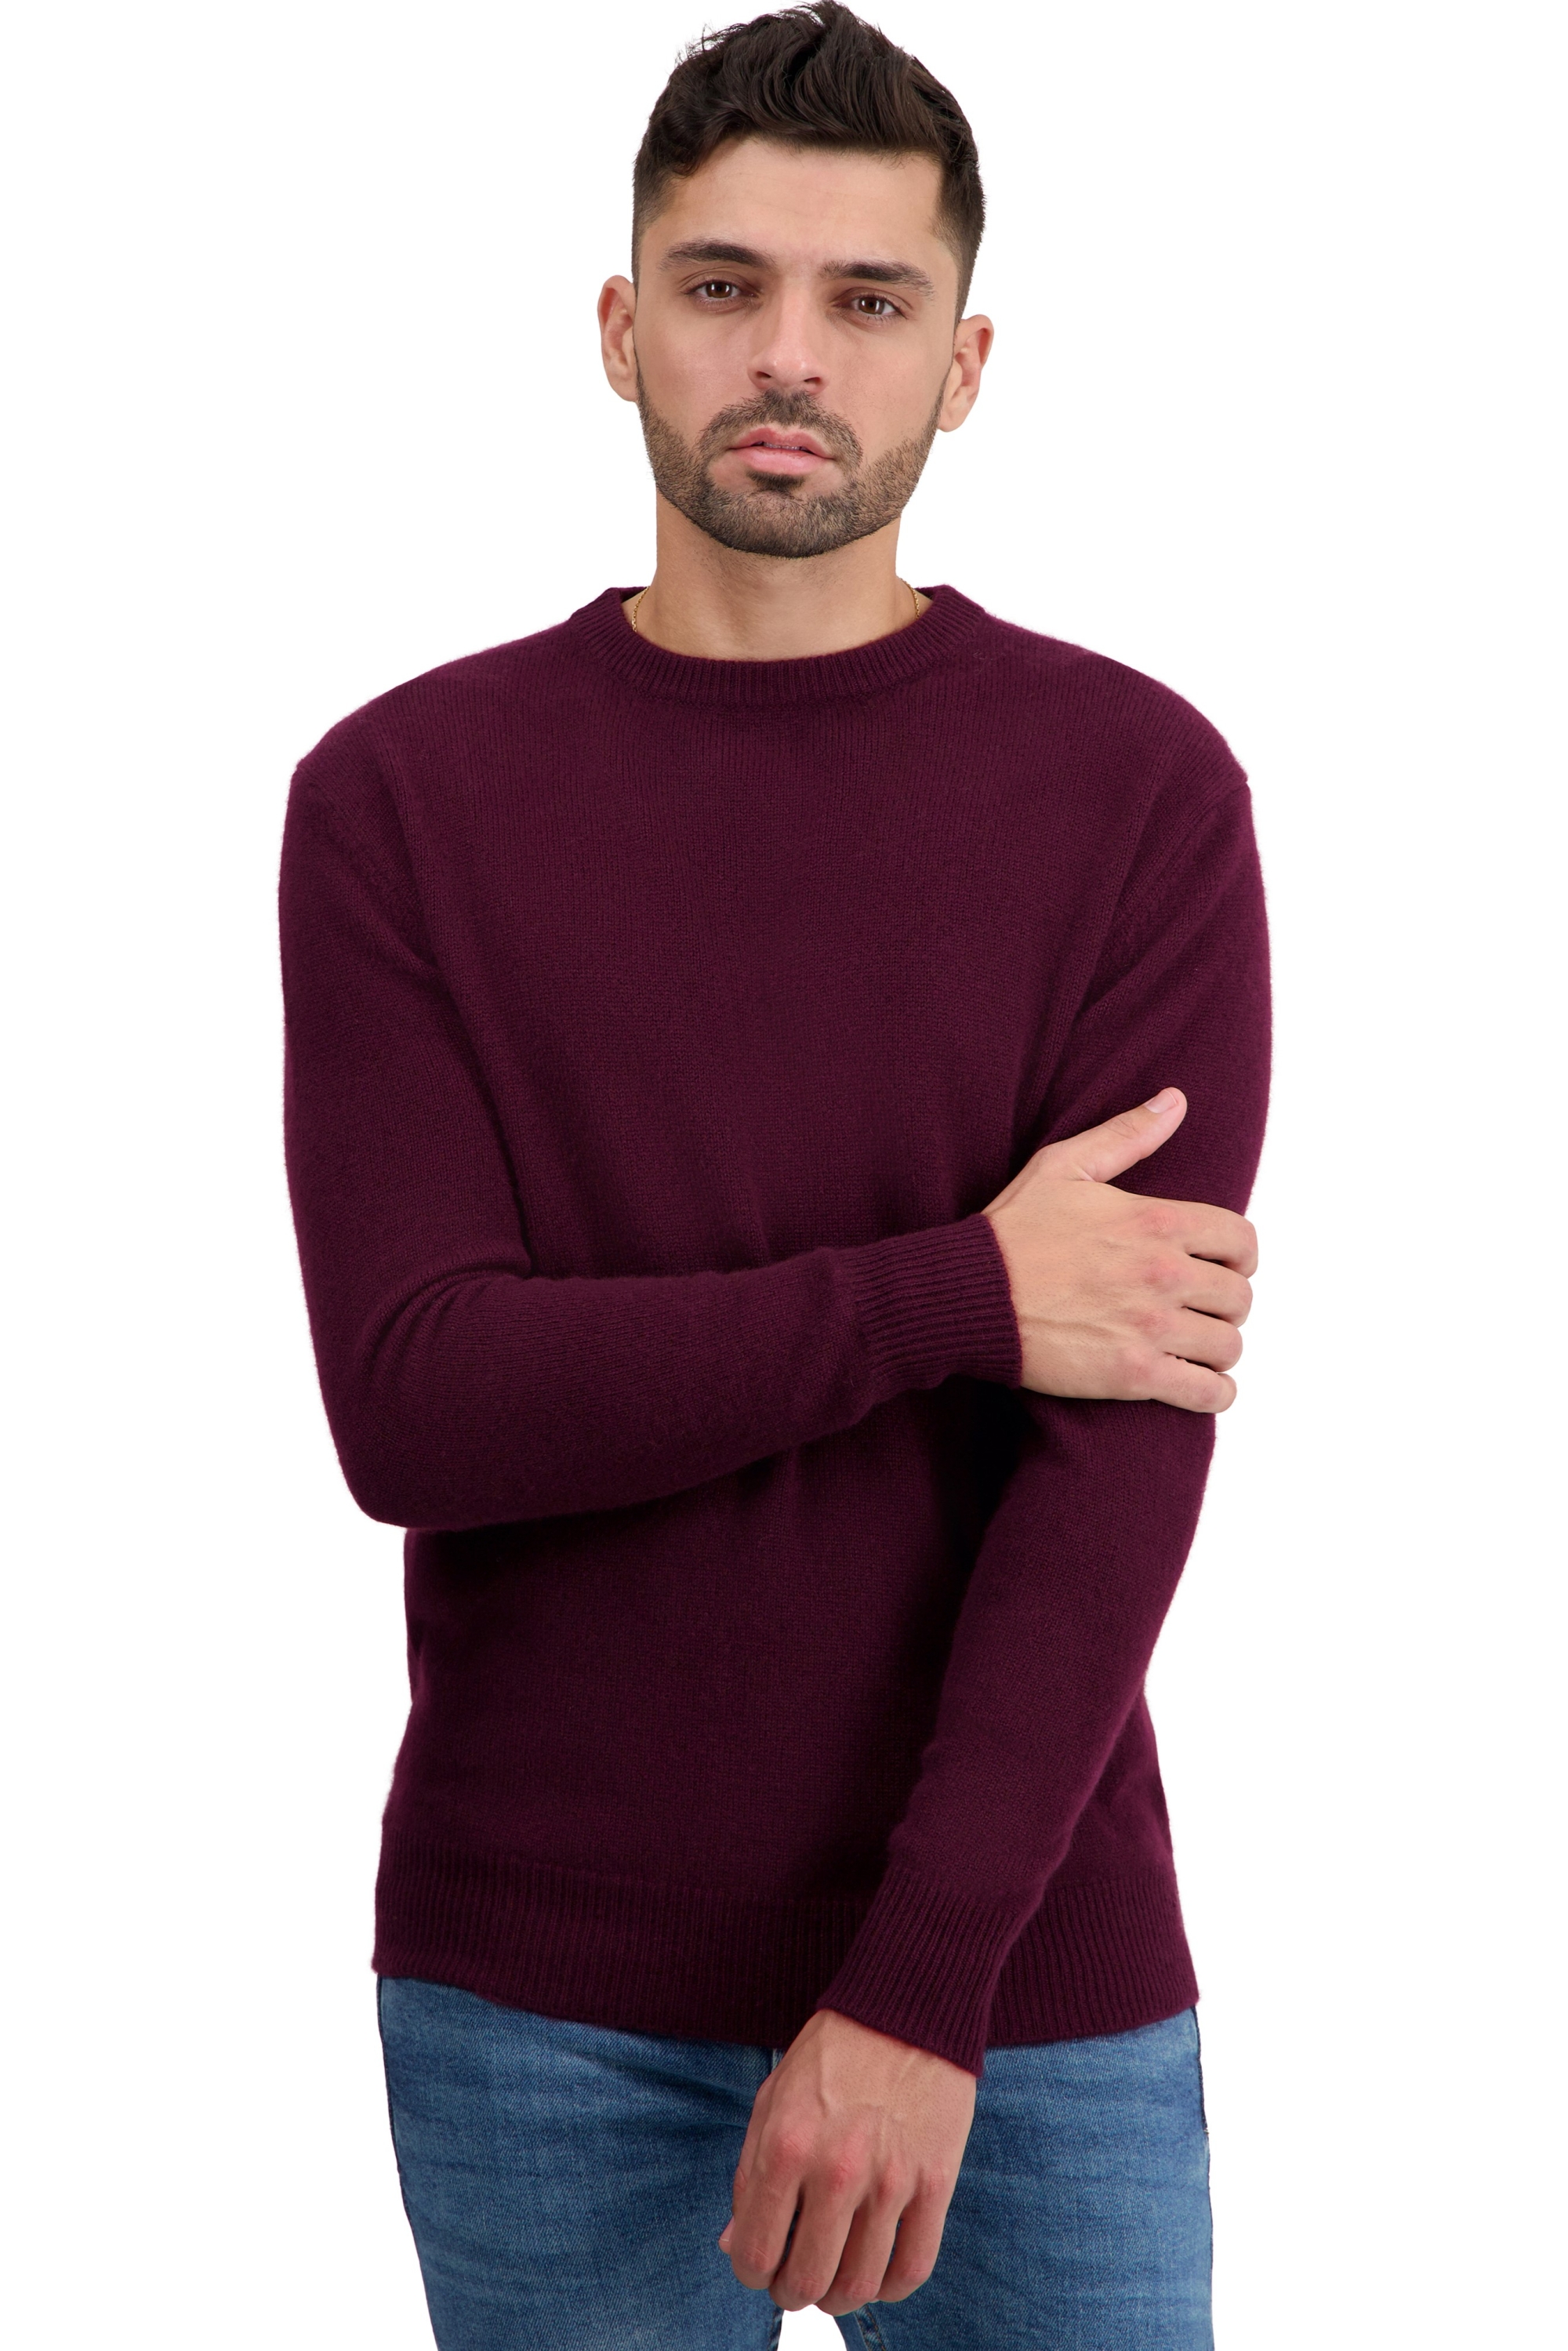 Cashmere men basic sweaters at low prices touraine first bordeaux xl